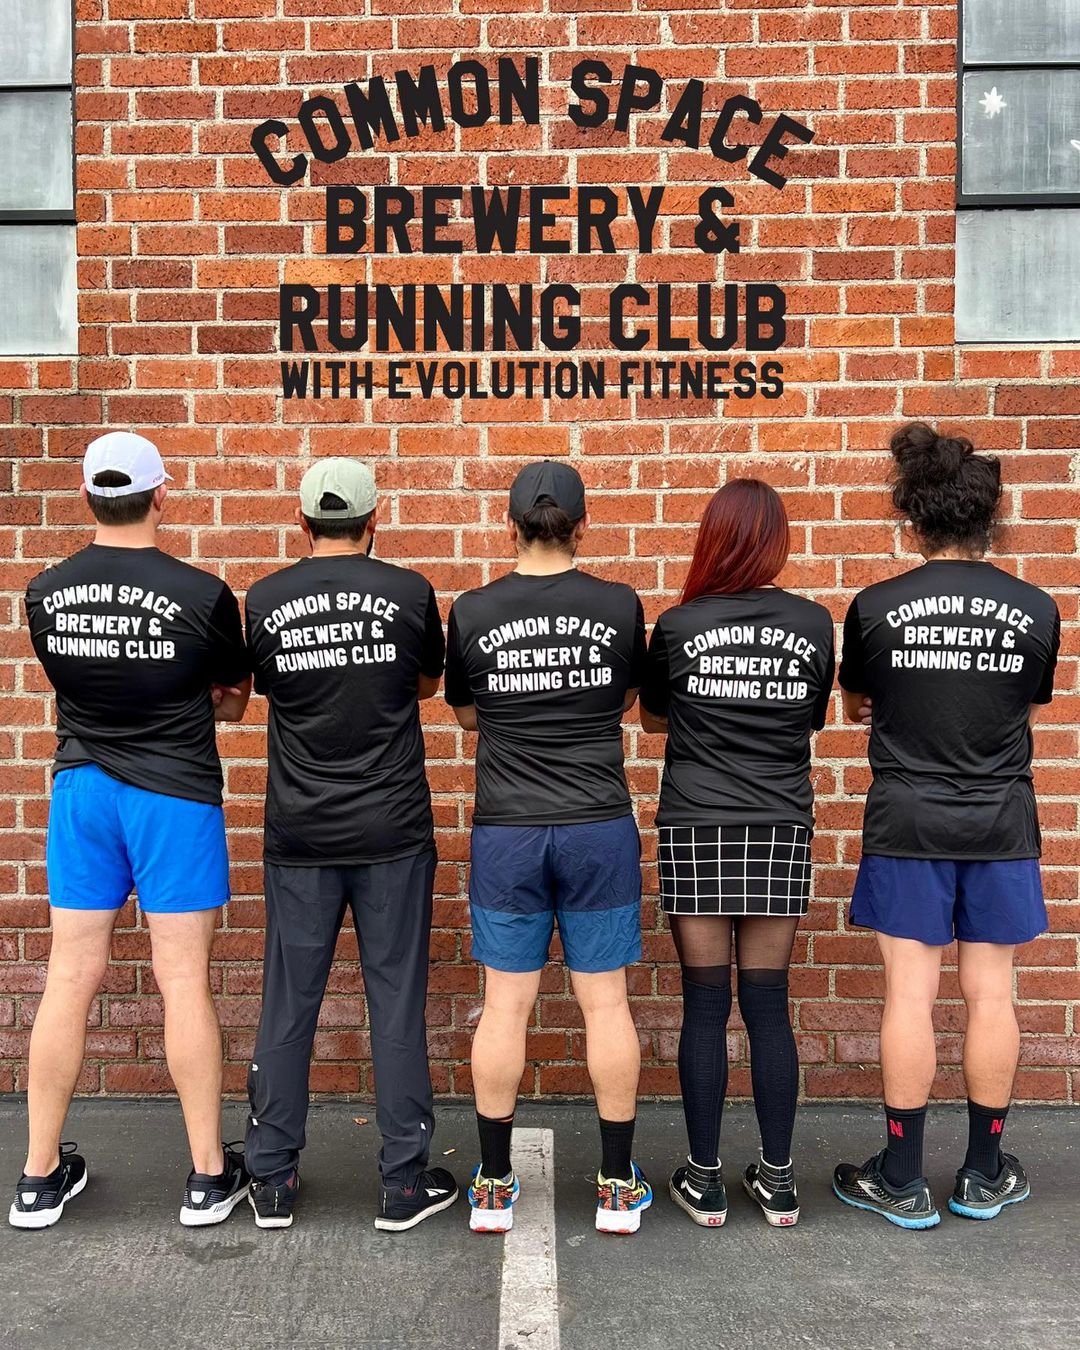 Weekly Common Space x Evolution Fitness Run Club — Common Space Brewery